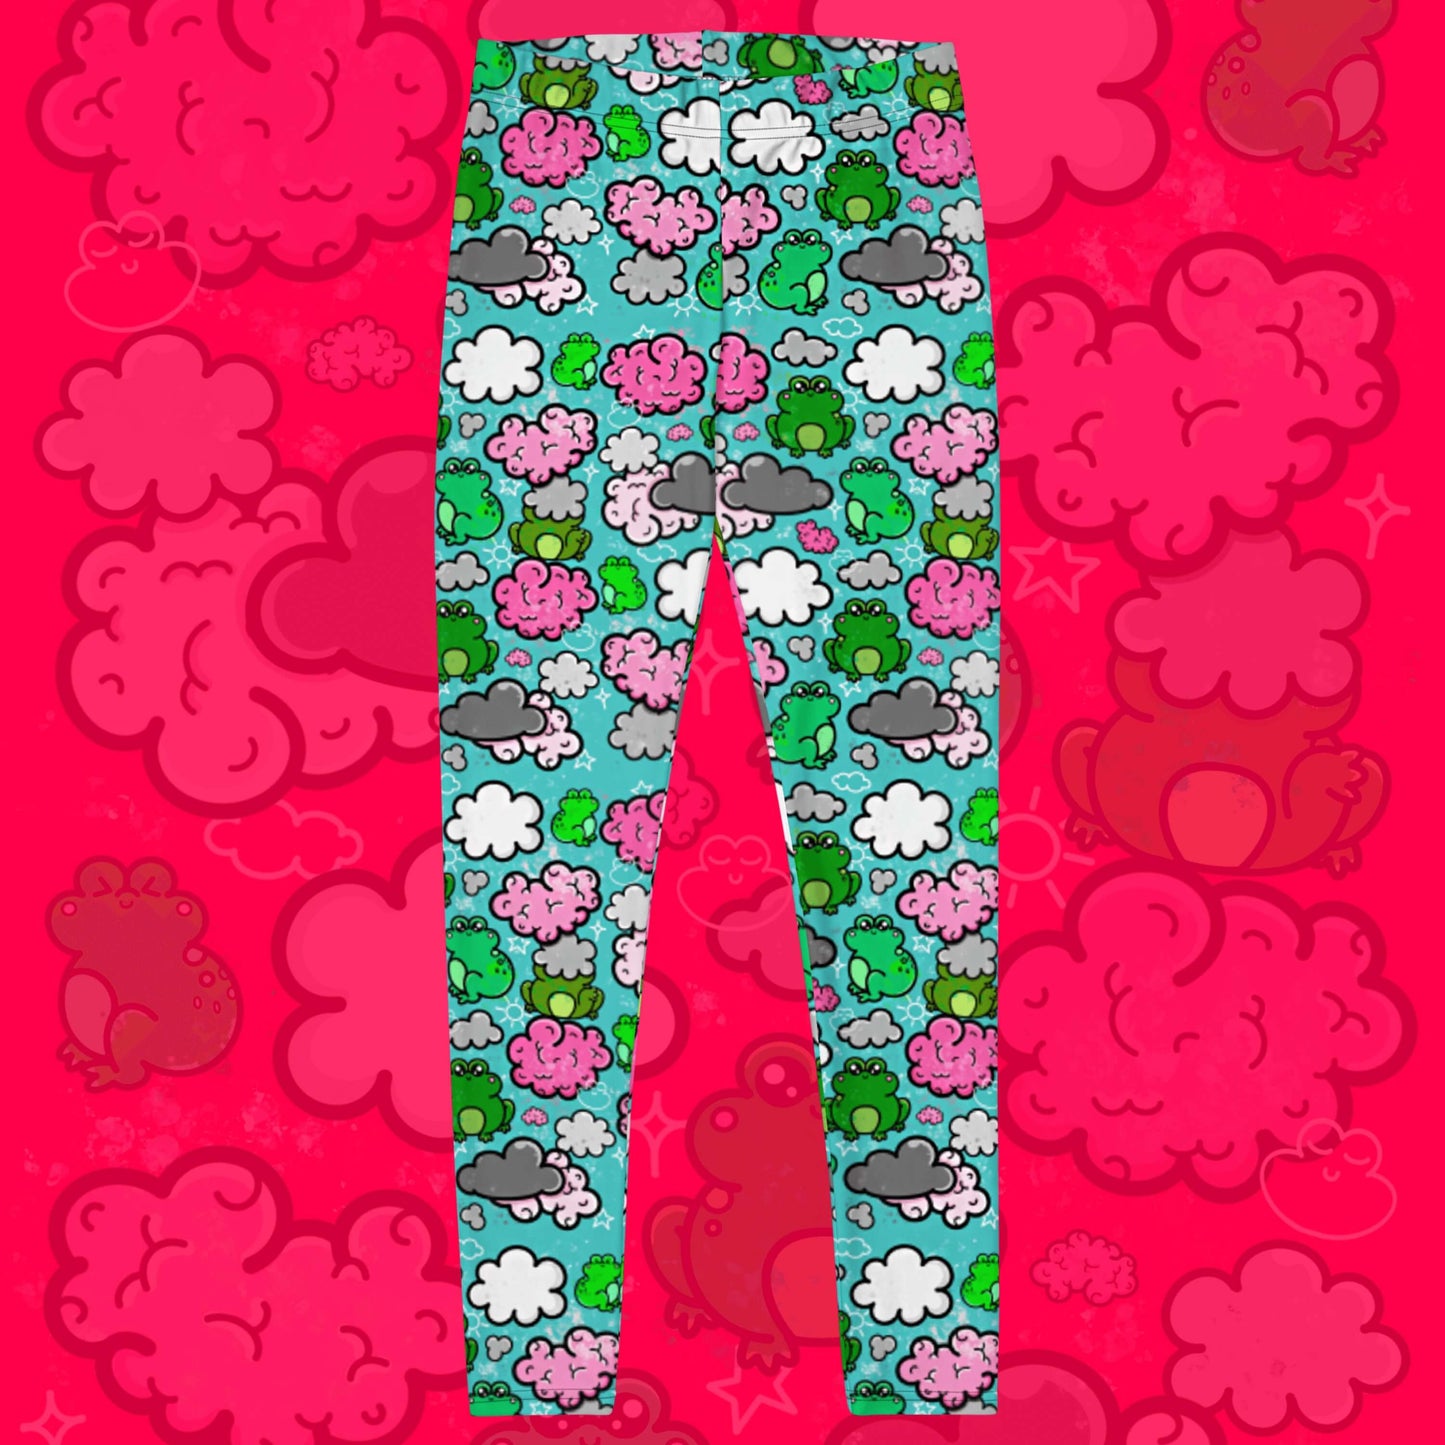 The Brain Frog Leggings - Brain Fog on a red background with a faded brain frog print. The leggings are an aqua blue base with various green kawaii face frogs with pink blush cheeks, pink brain style clouds, white and grey clouds and white sparkles all over. The design was created to raise awareness of Brain Fog.